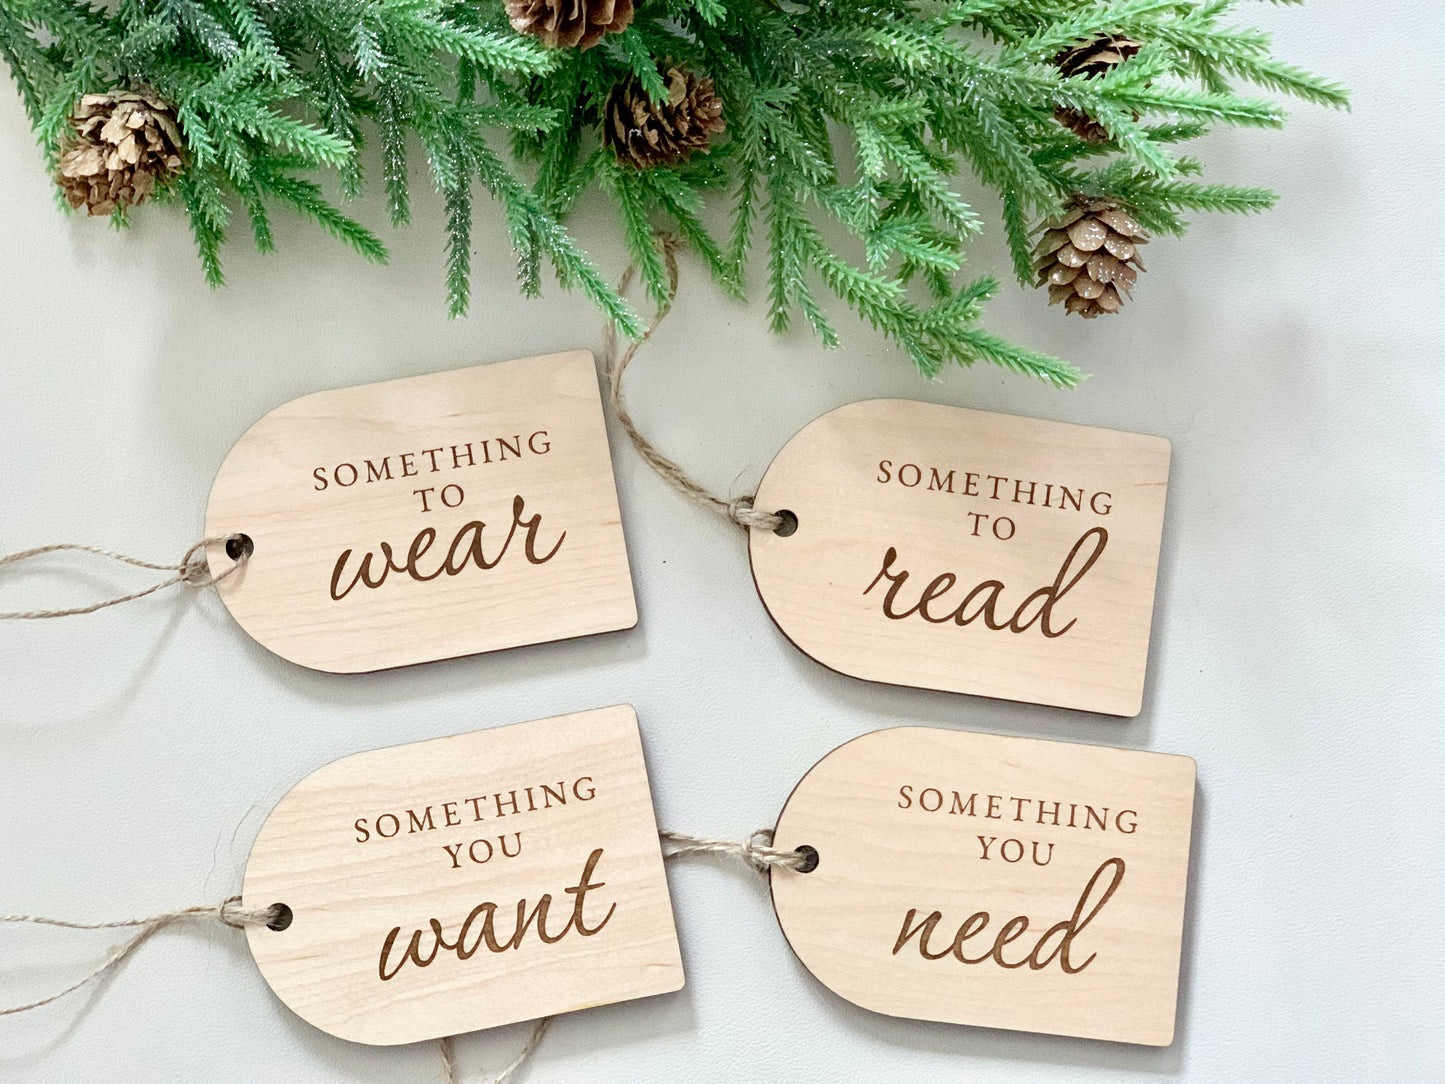 Something You Want, Need, to Read, to Wear Christmas Tags - Set of 4